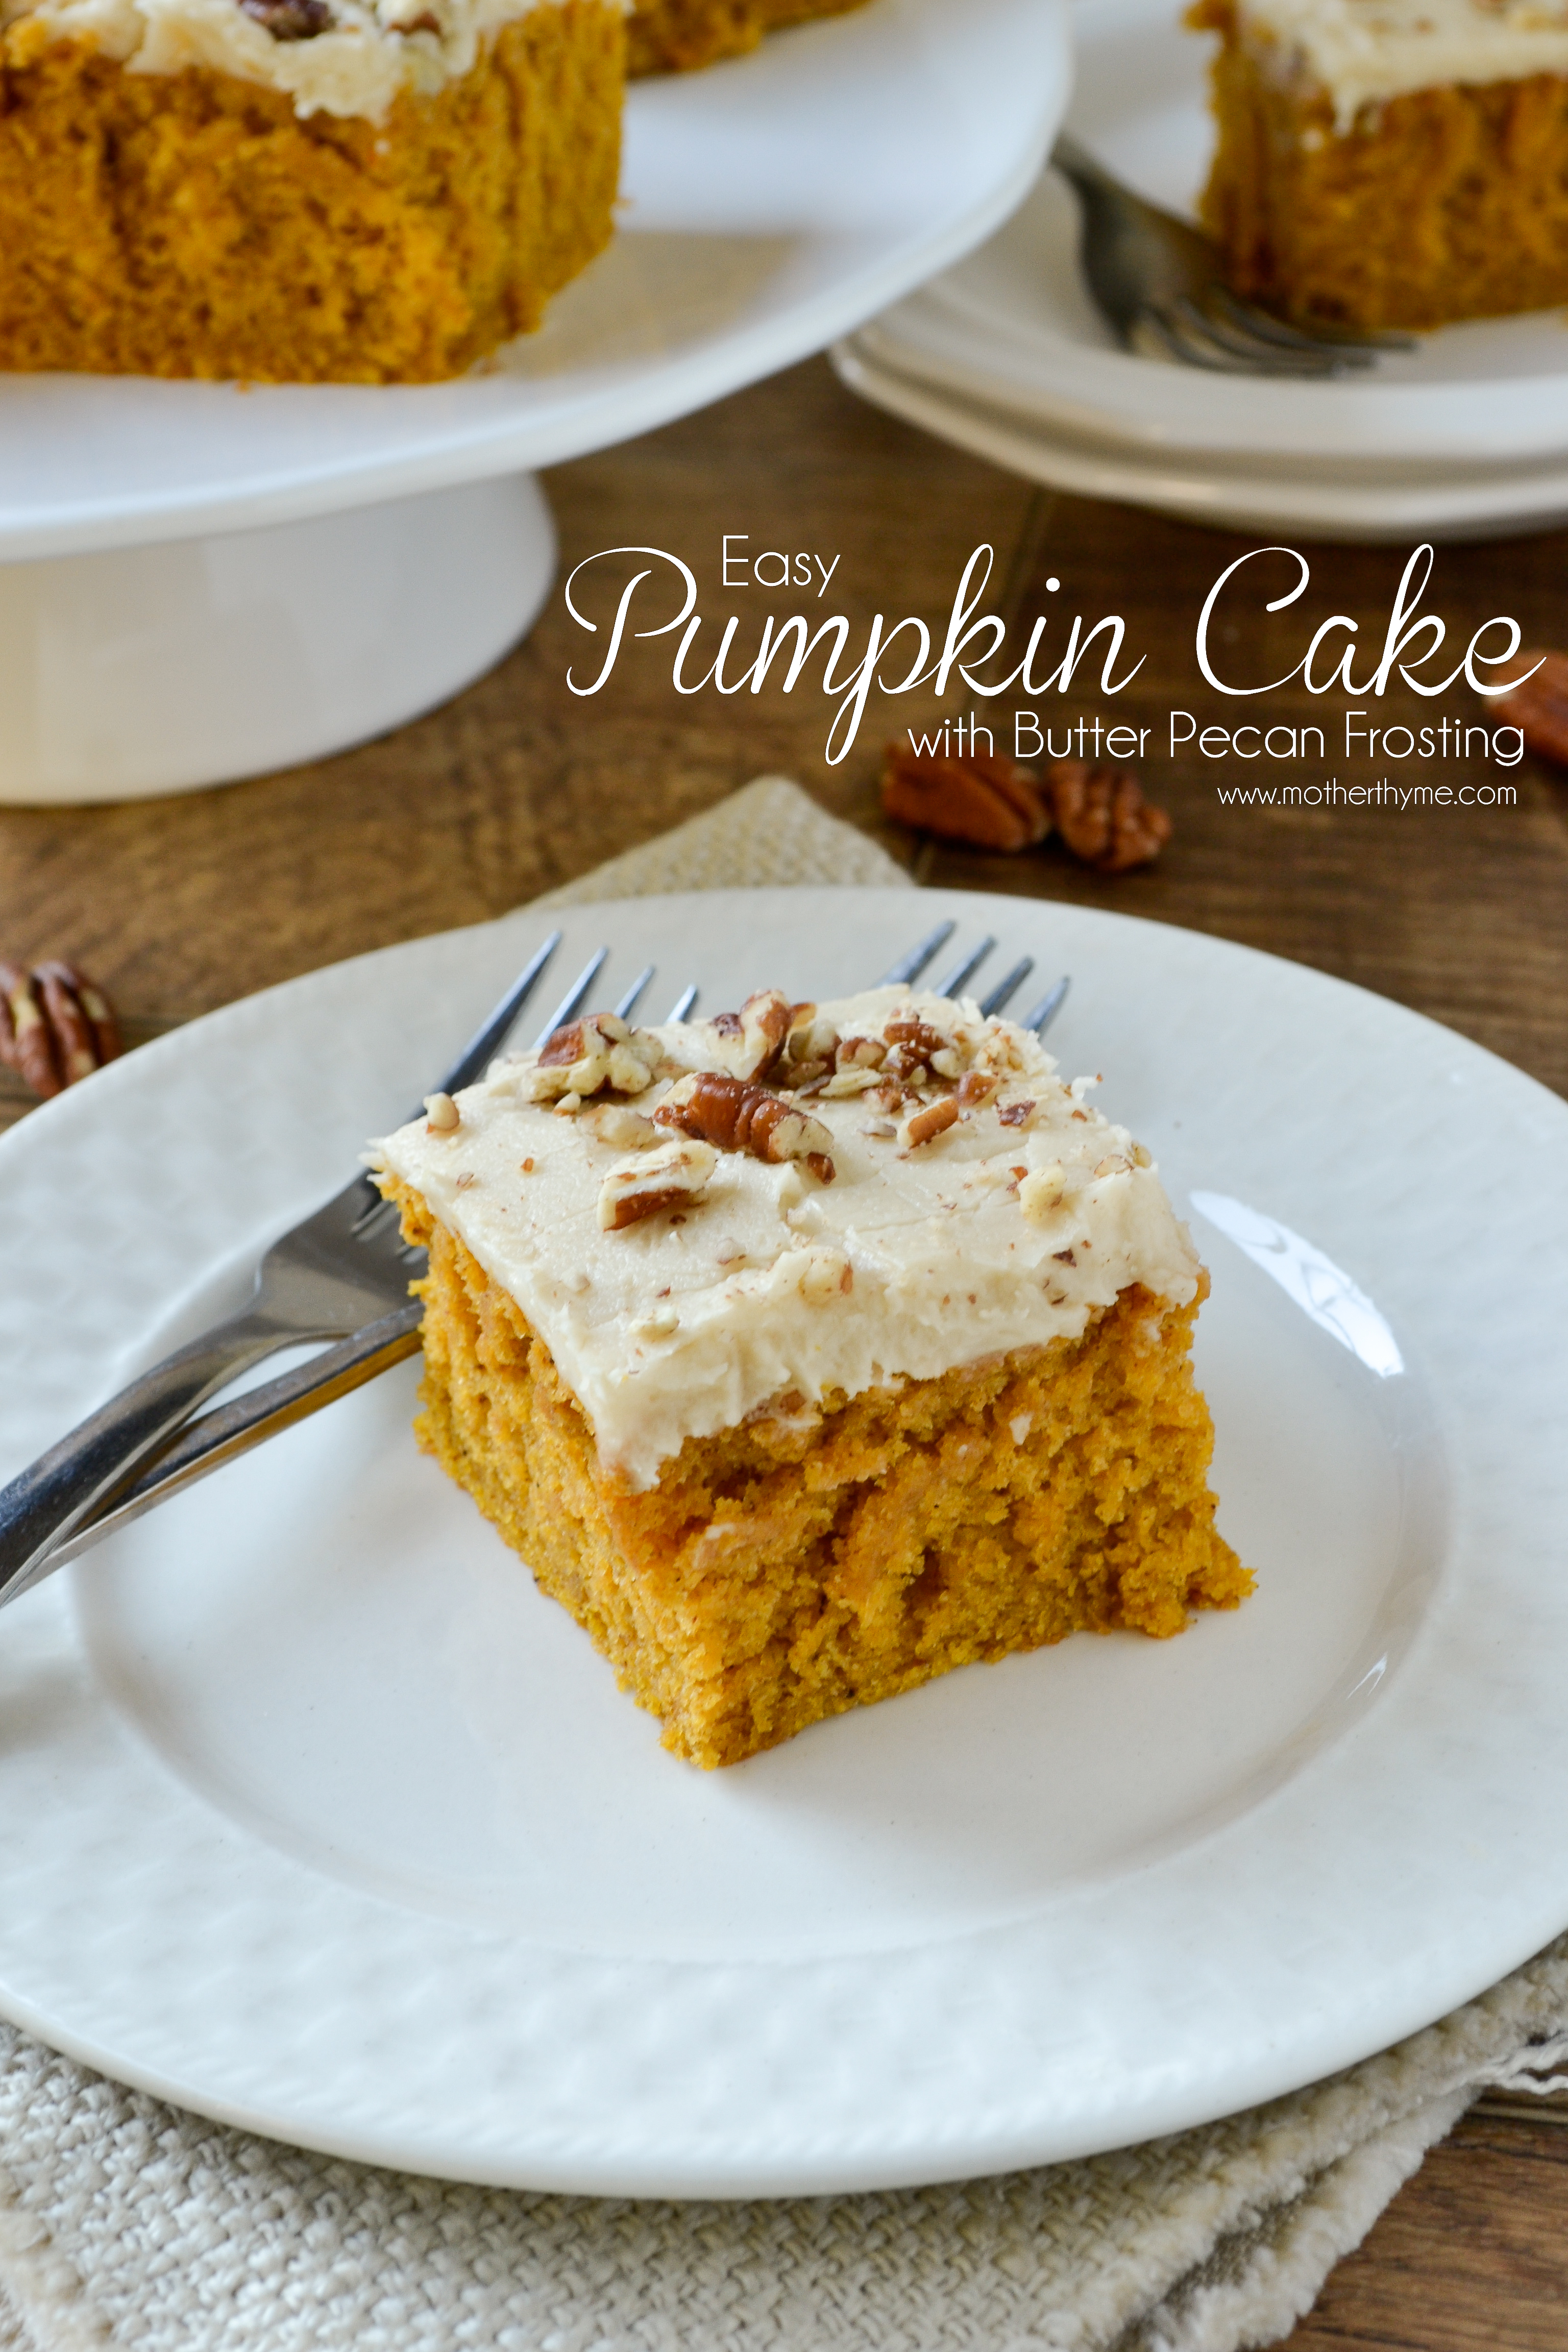 Easy Pumpkin Cake with Butter Pecan Frosting